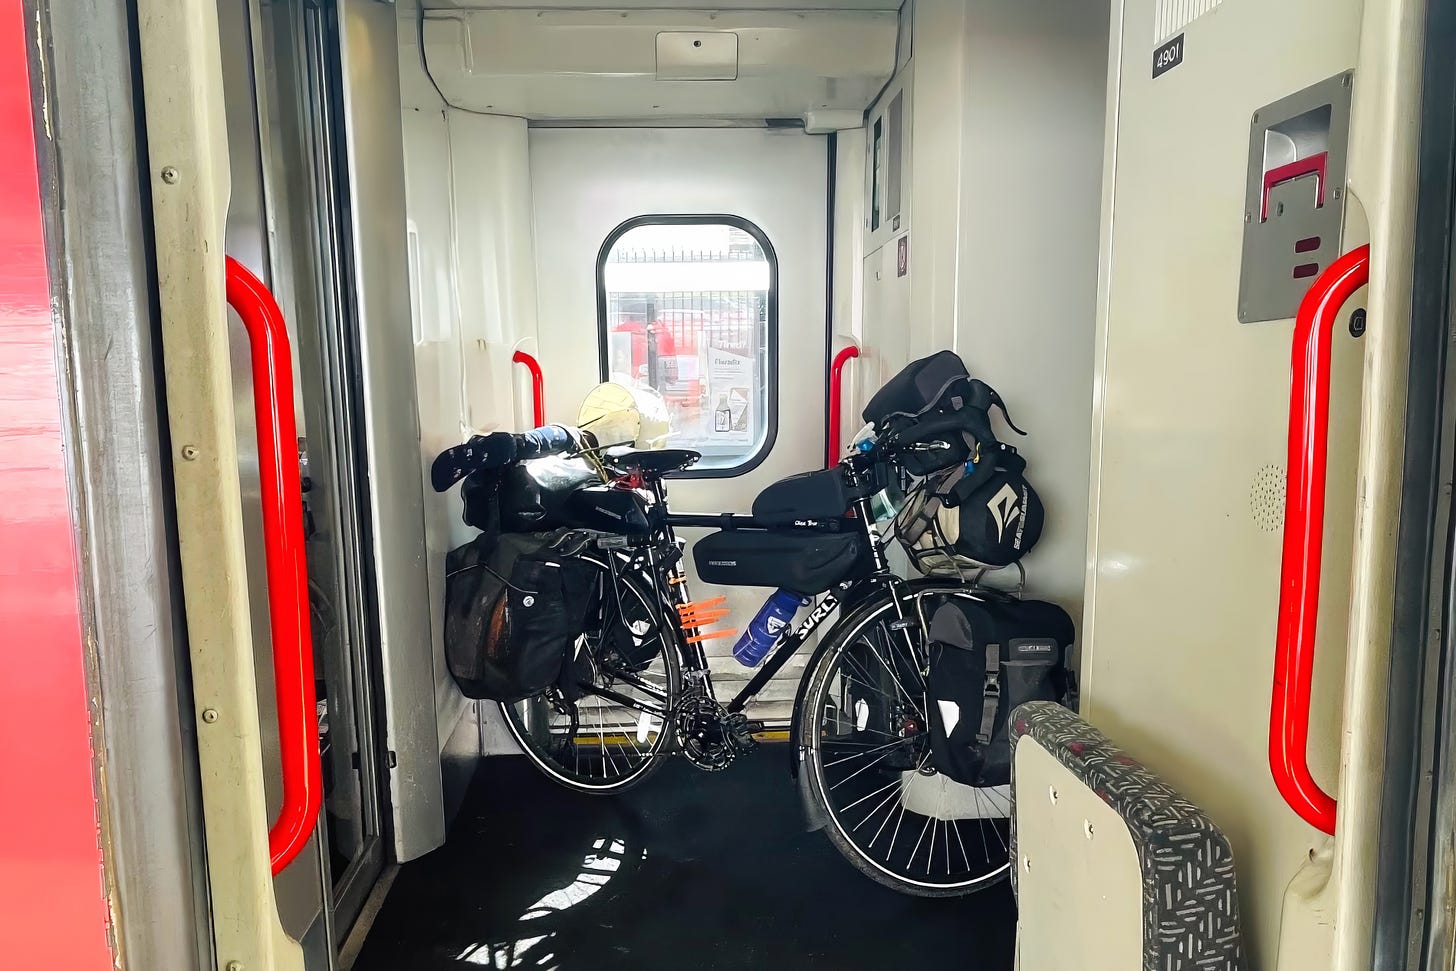 Curly the Surly, Ghandi's bike, packed up and loaded onto the train, ready for the upcoming adventure.